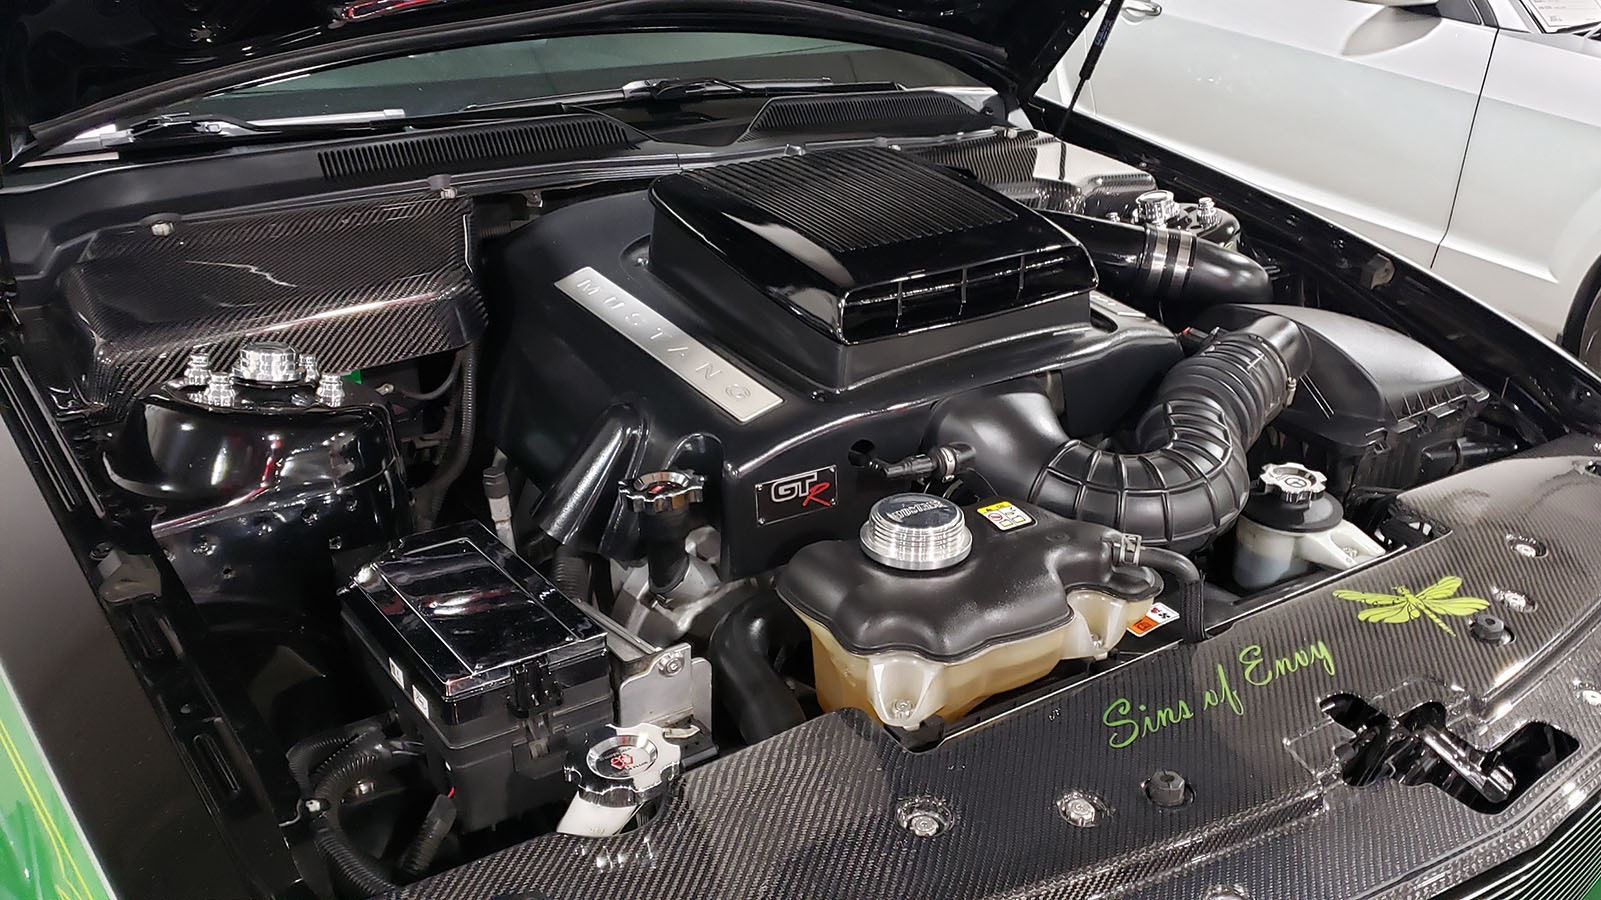 A look under the hood of a green Mustang called Sins of Envy.